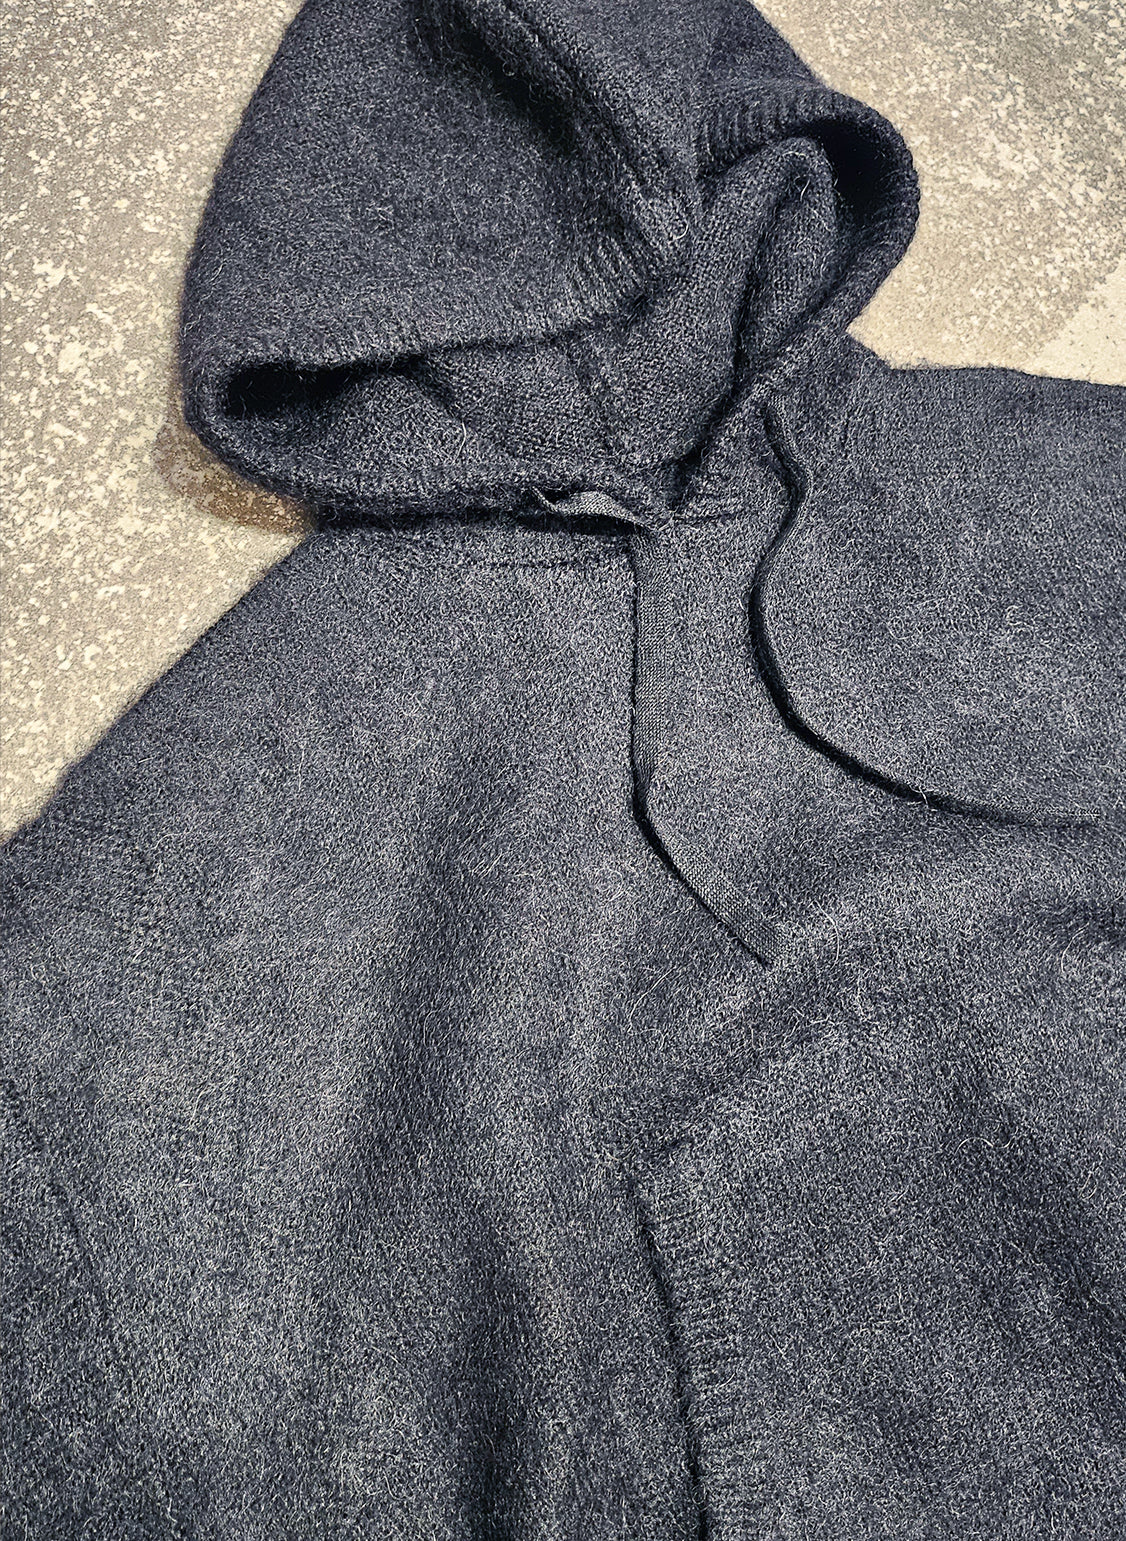 THE GUERNSEY HOODIE IN BLACK MOHAIR